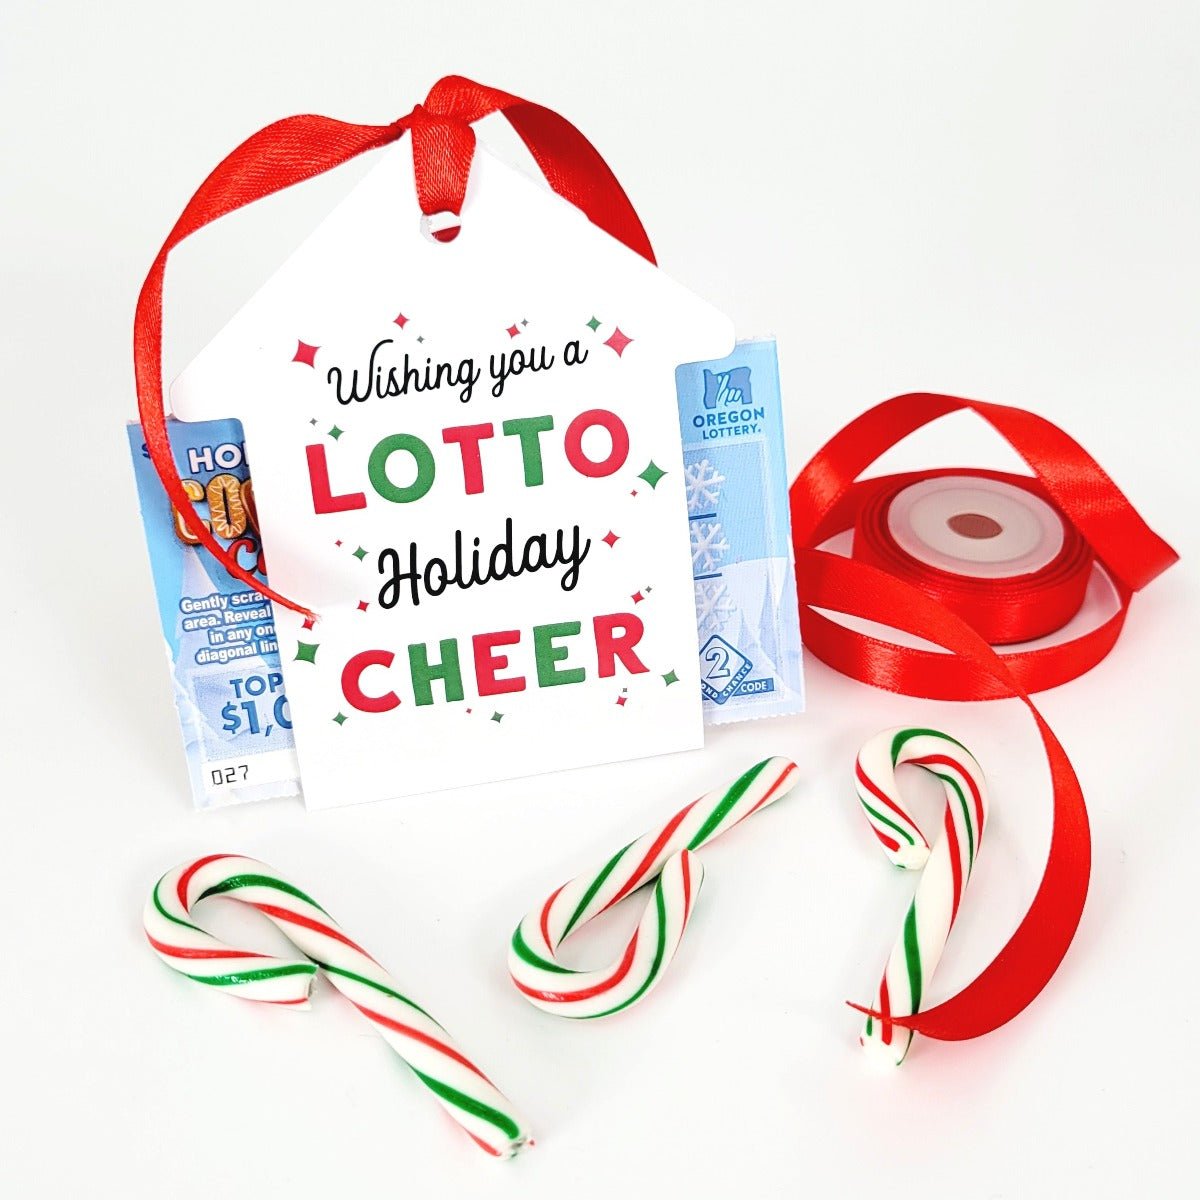 Lottery Ticket Holder - Holiday - Wishing You a Lotto Holiday Cheer - All Things Real Estate